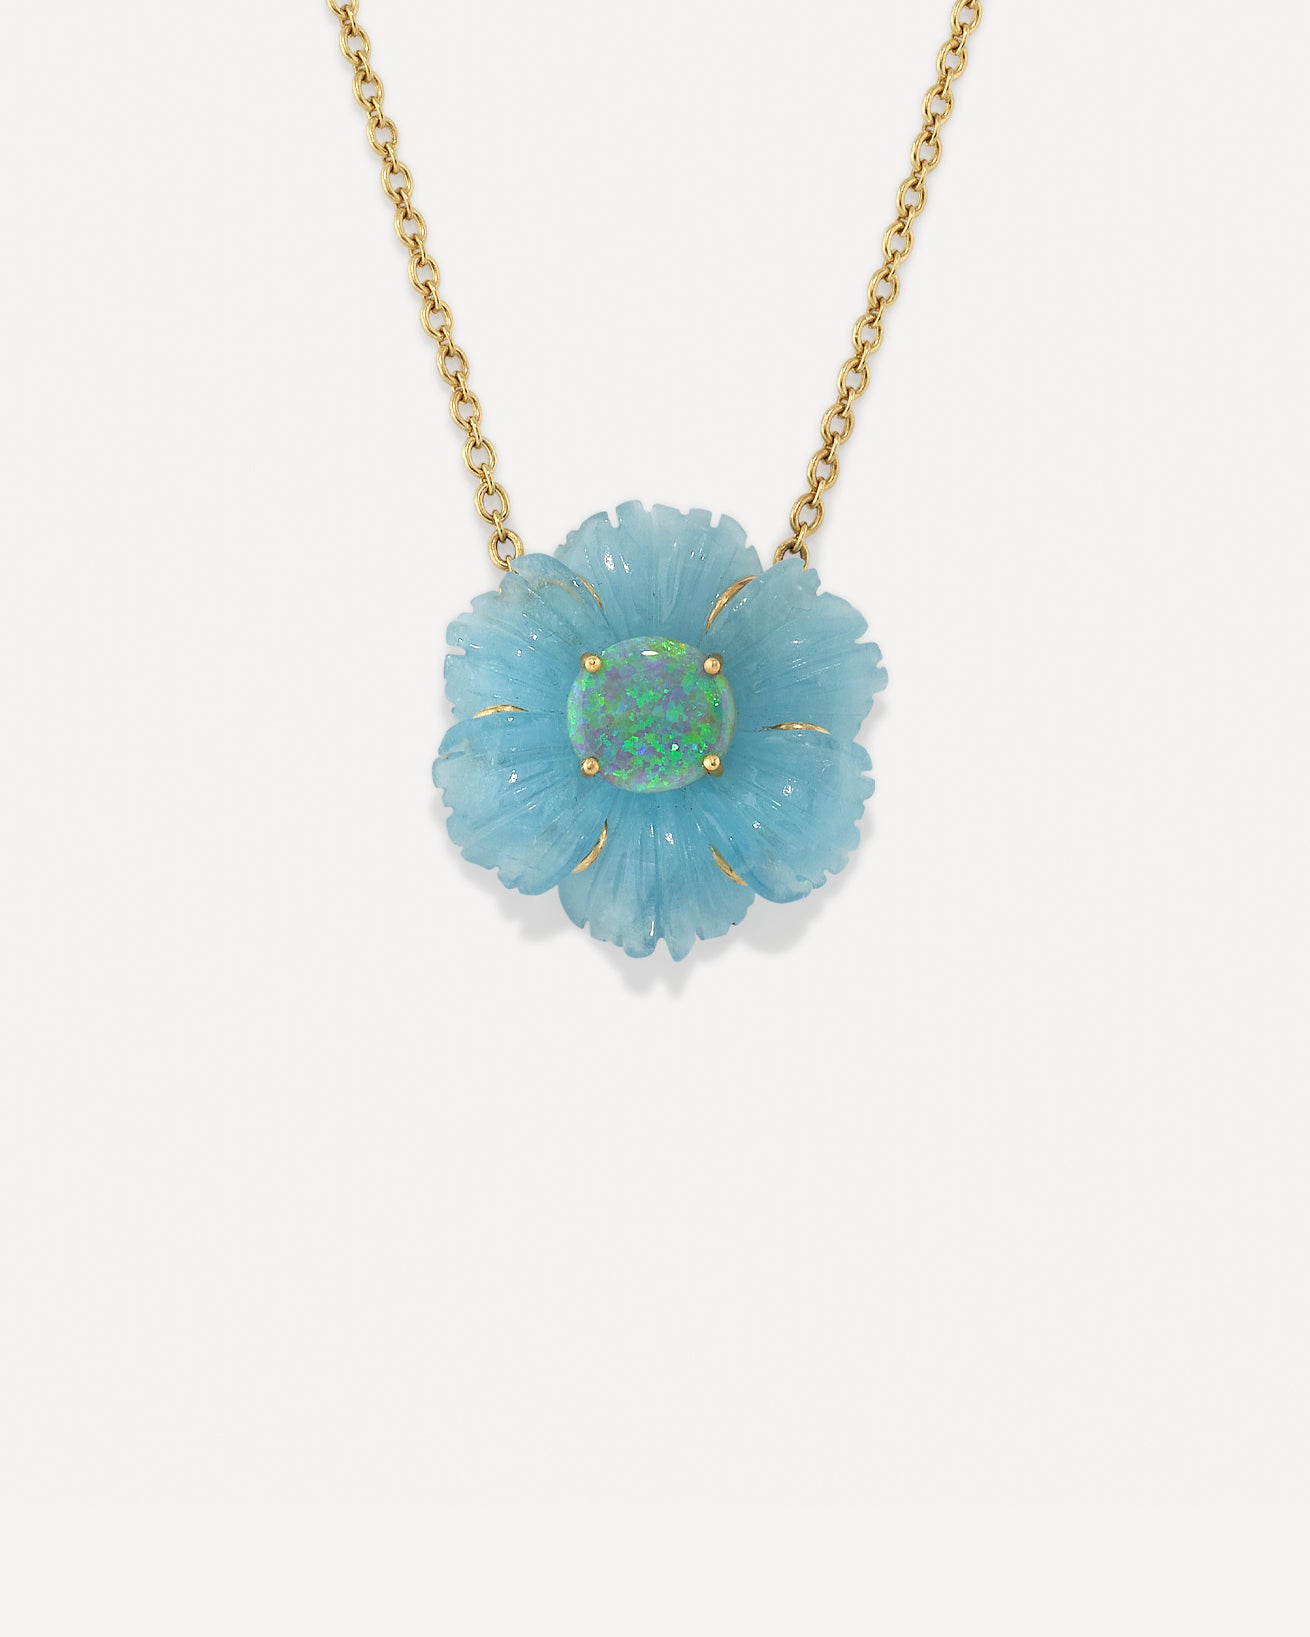 Irene Neuwirth 18kt yellow gold opal necklace